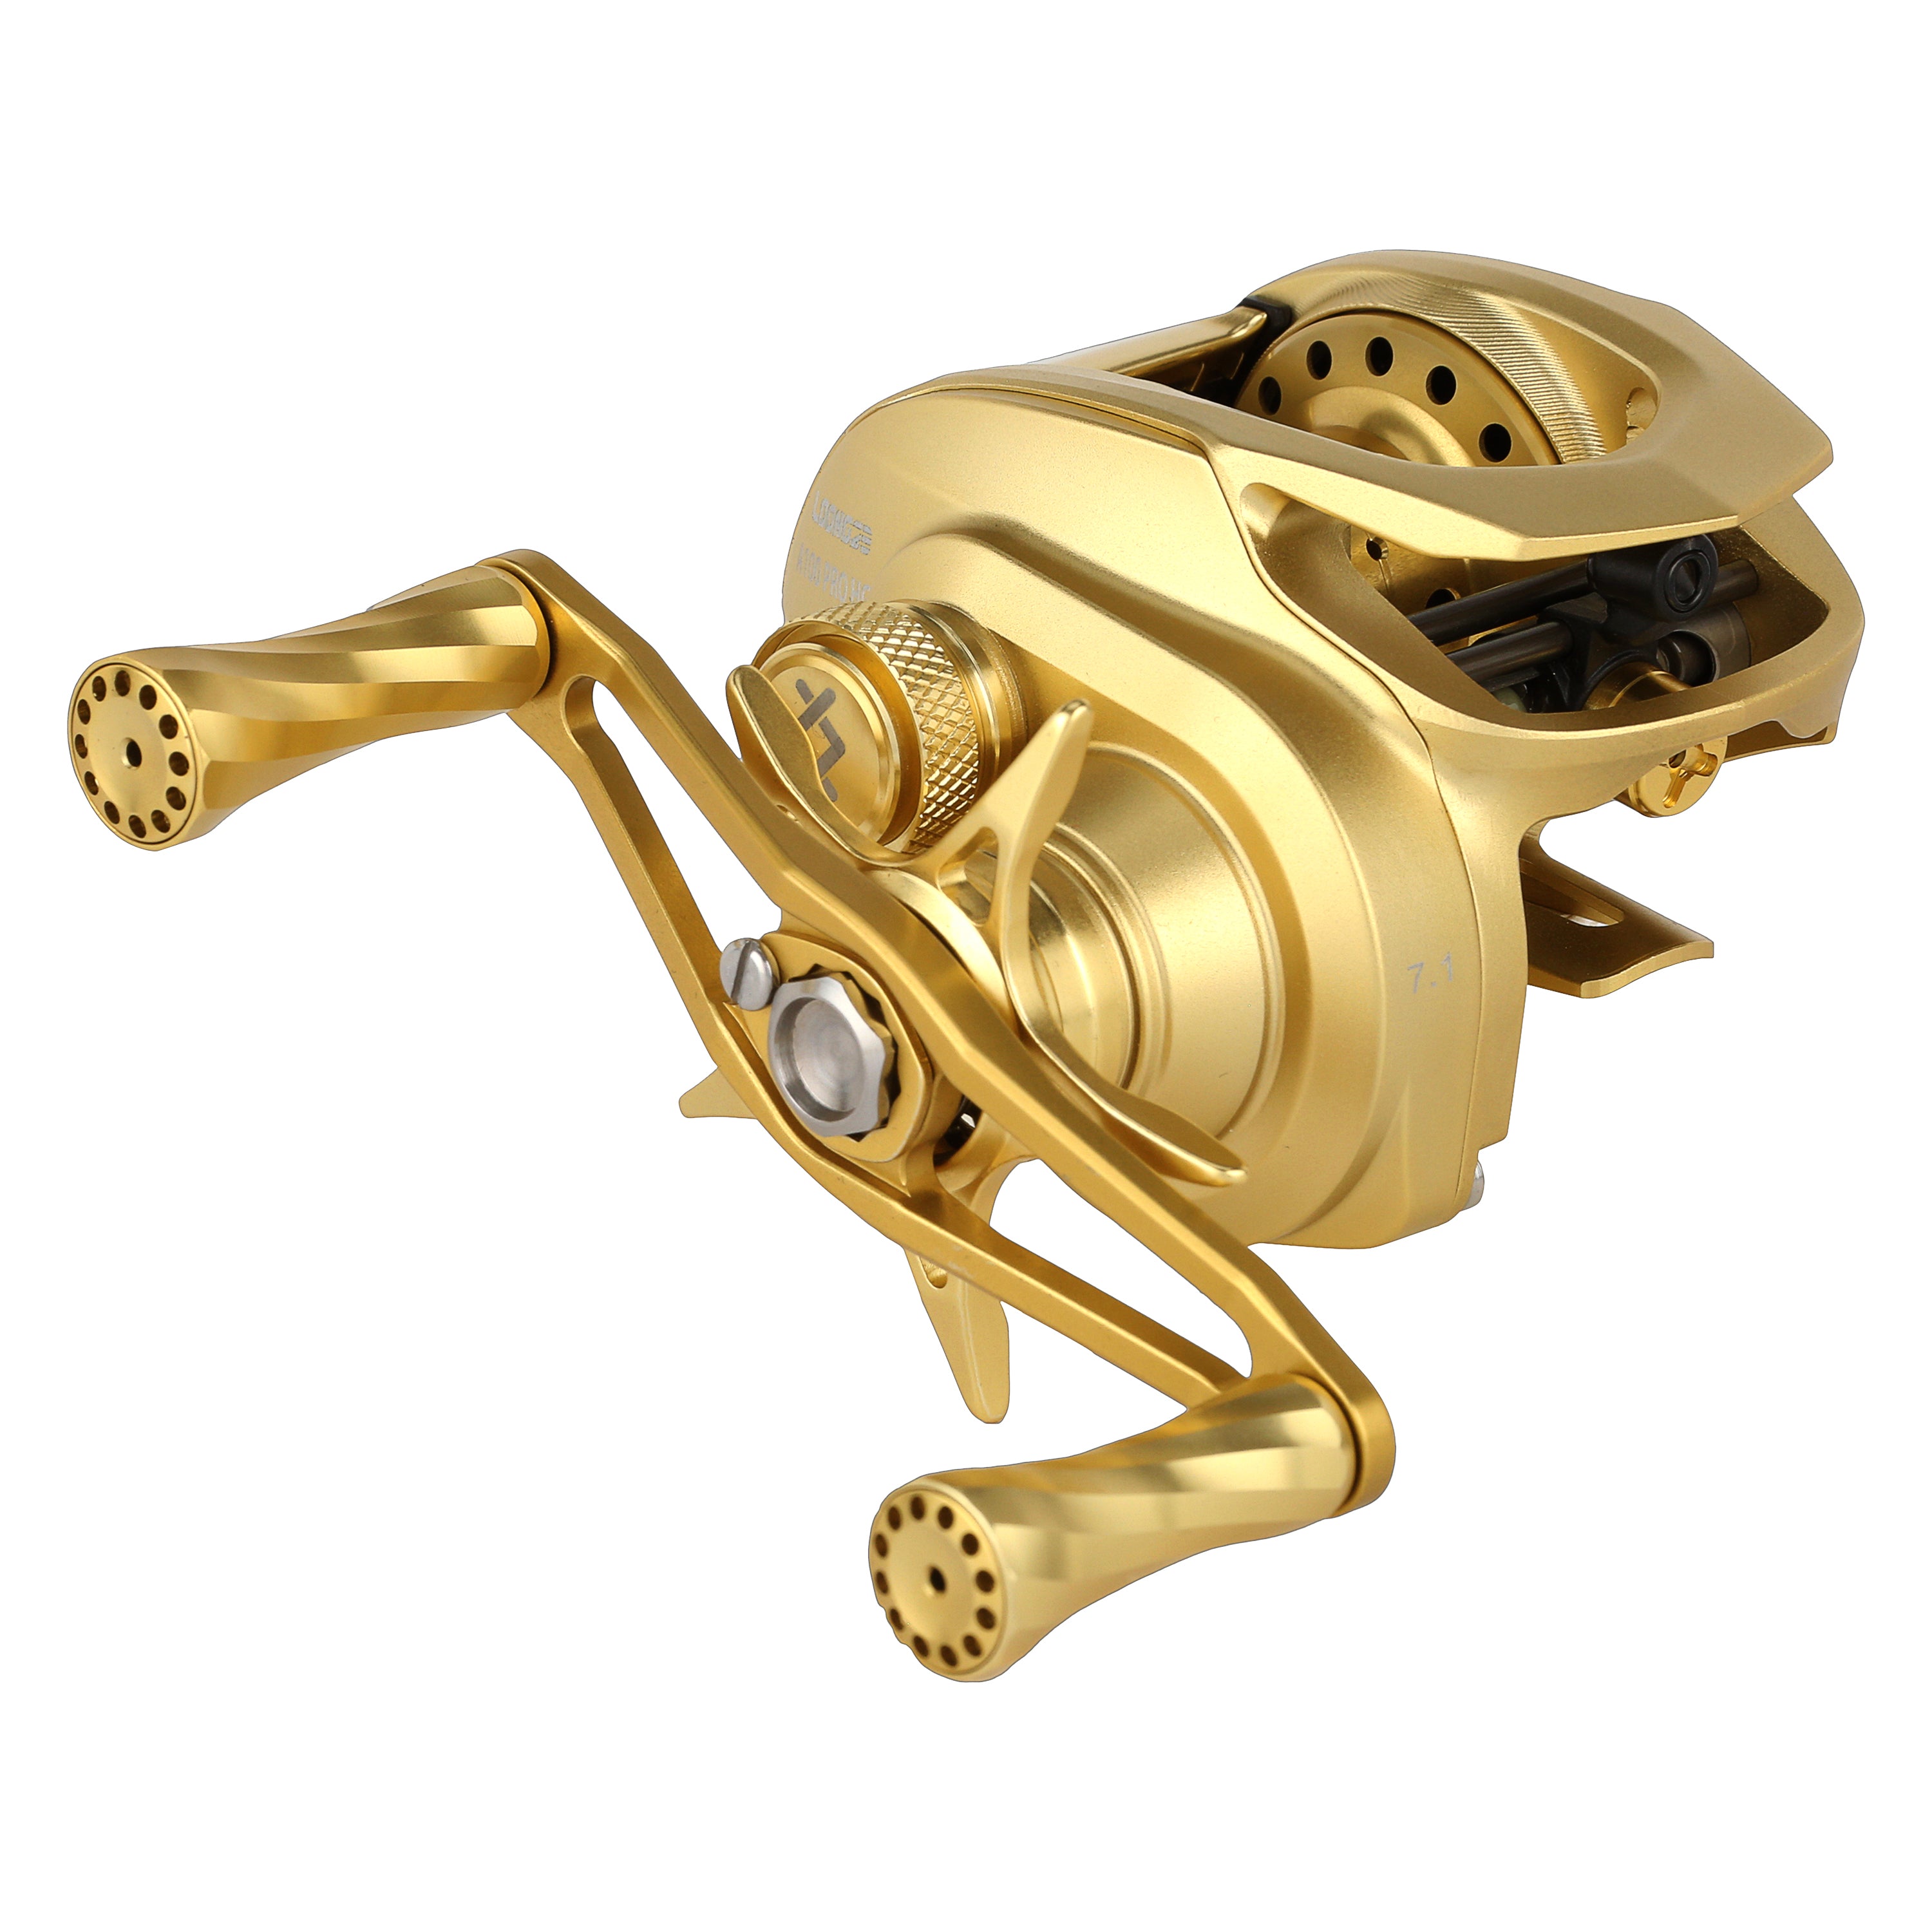 Why Spin-Cast Reels Were Such an Innovation - The Golden Age of